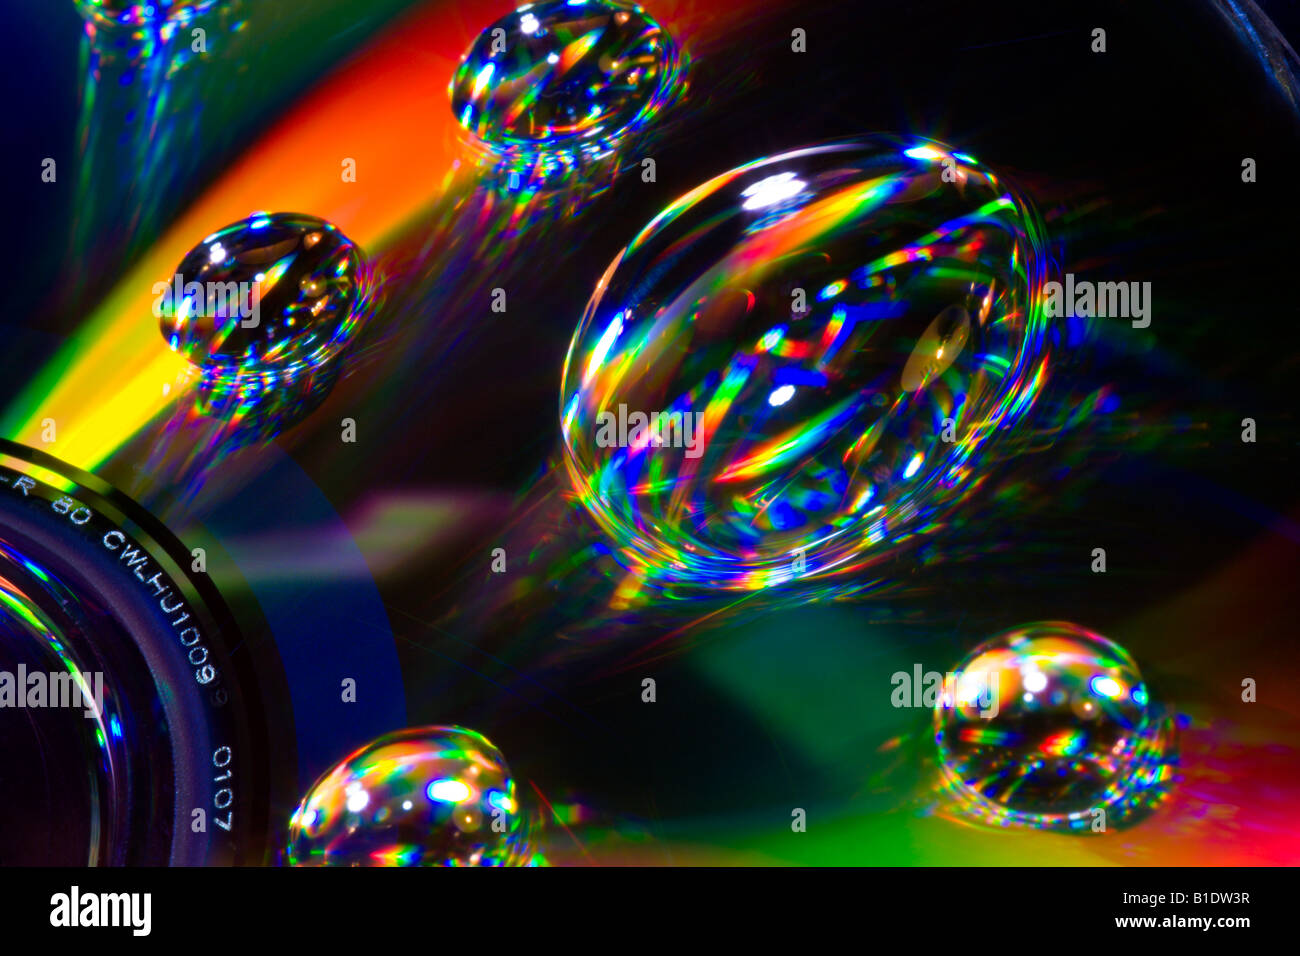 Light spectrum reflecting in water bubbles on CD DVD disk Stock Photo